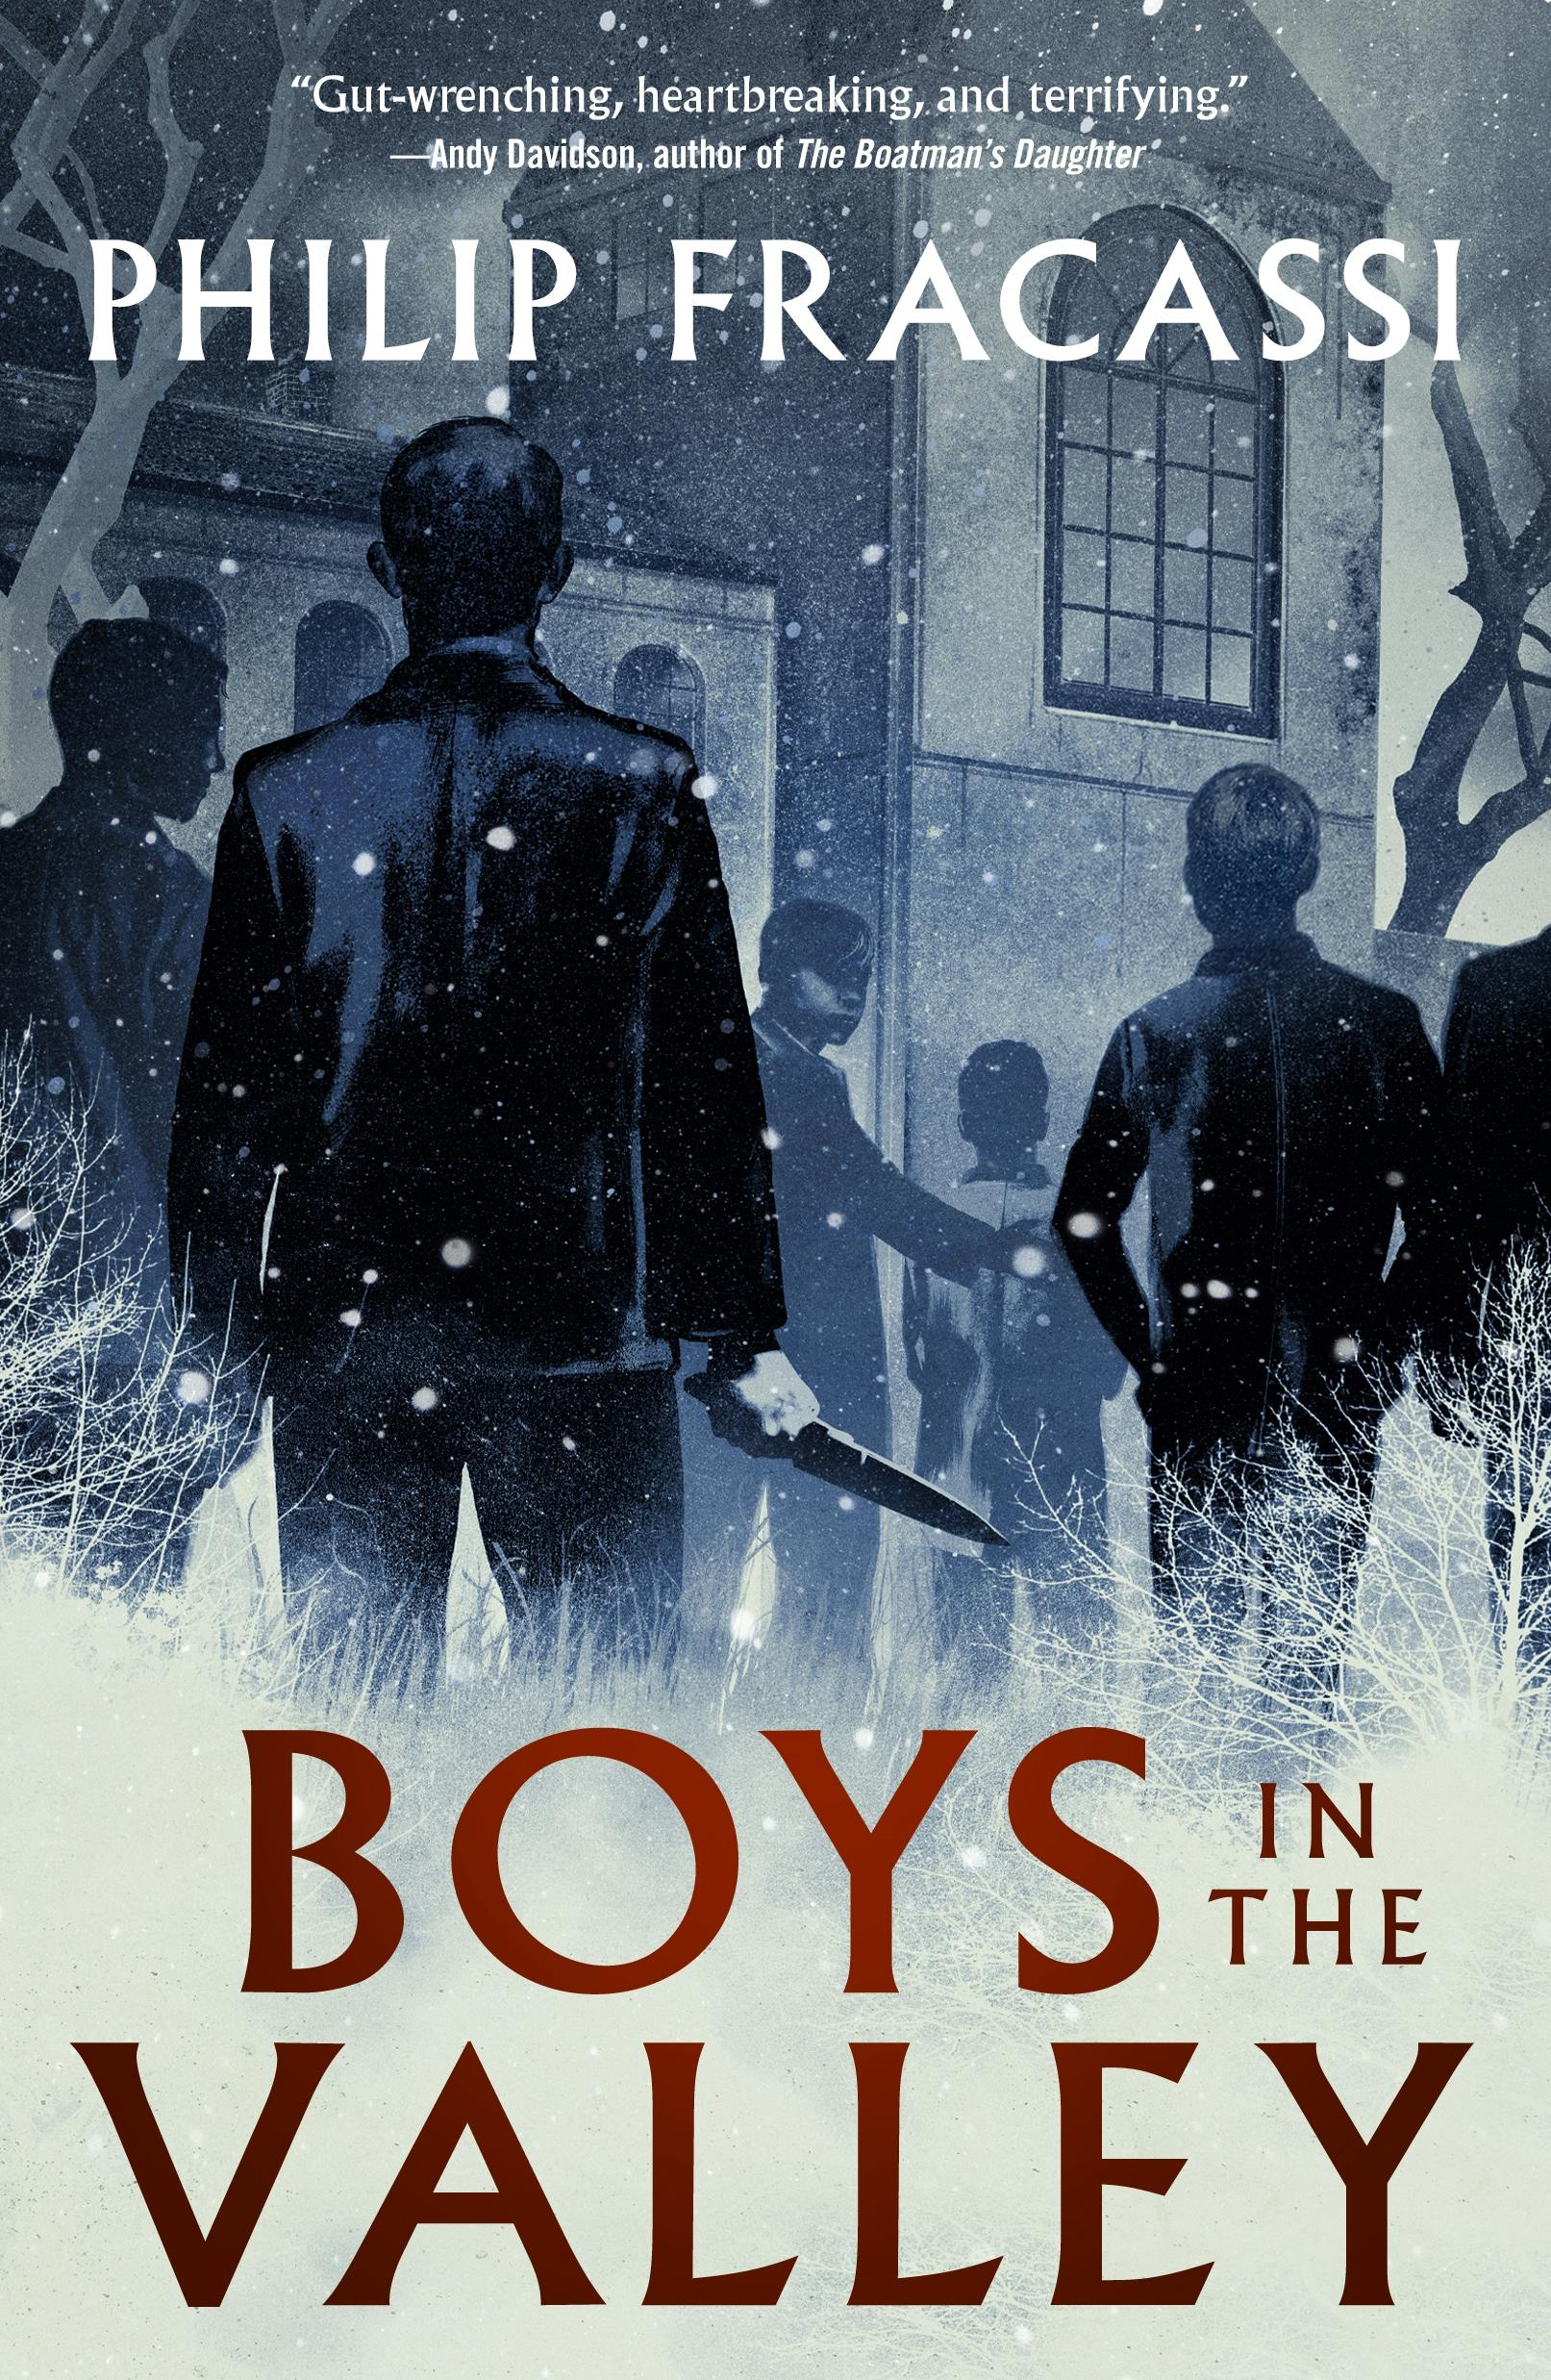 Cover for the book titled as: Boys in the Valley